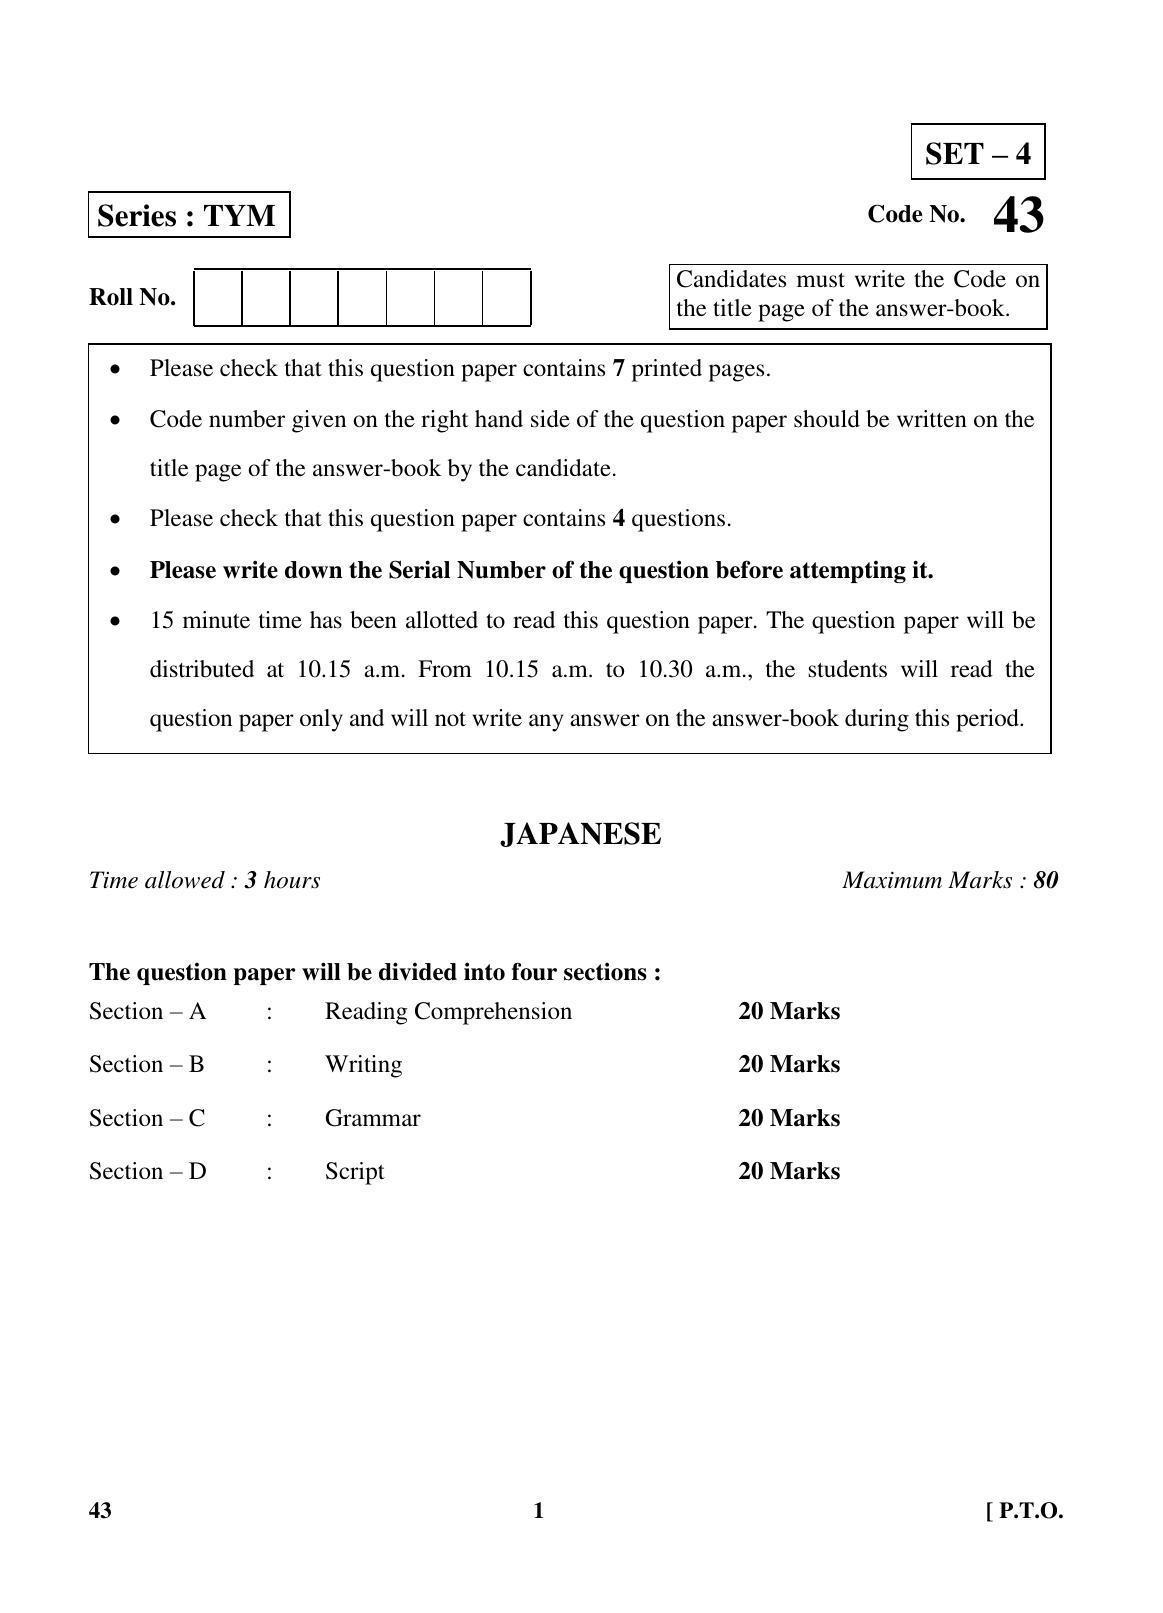 CBSE Class 10 43 (Japanese) 2018 Question Paper - Page 1